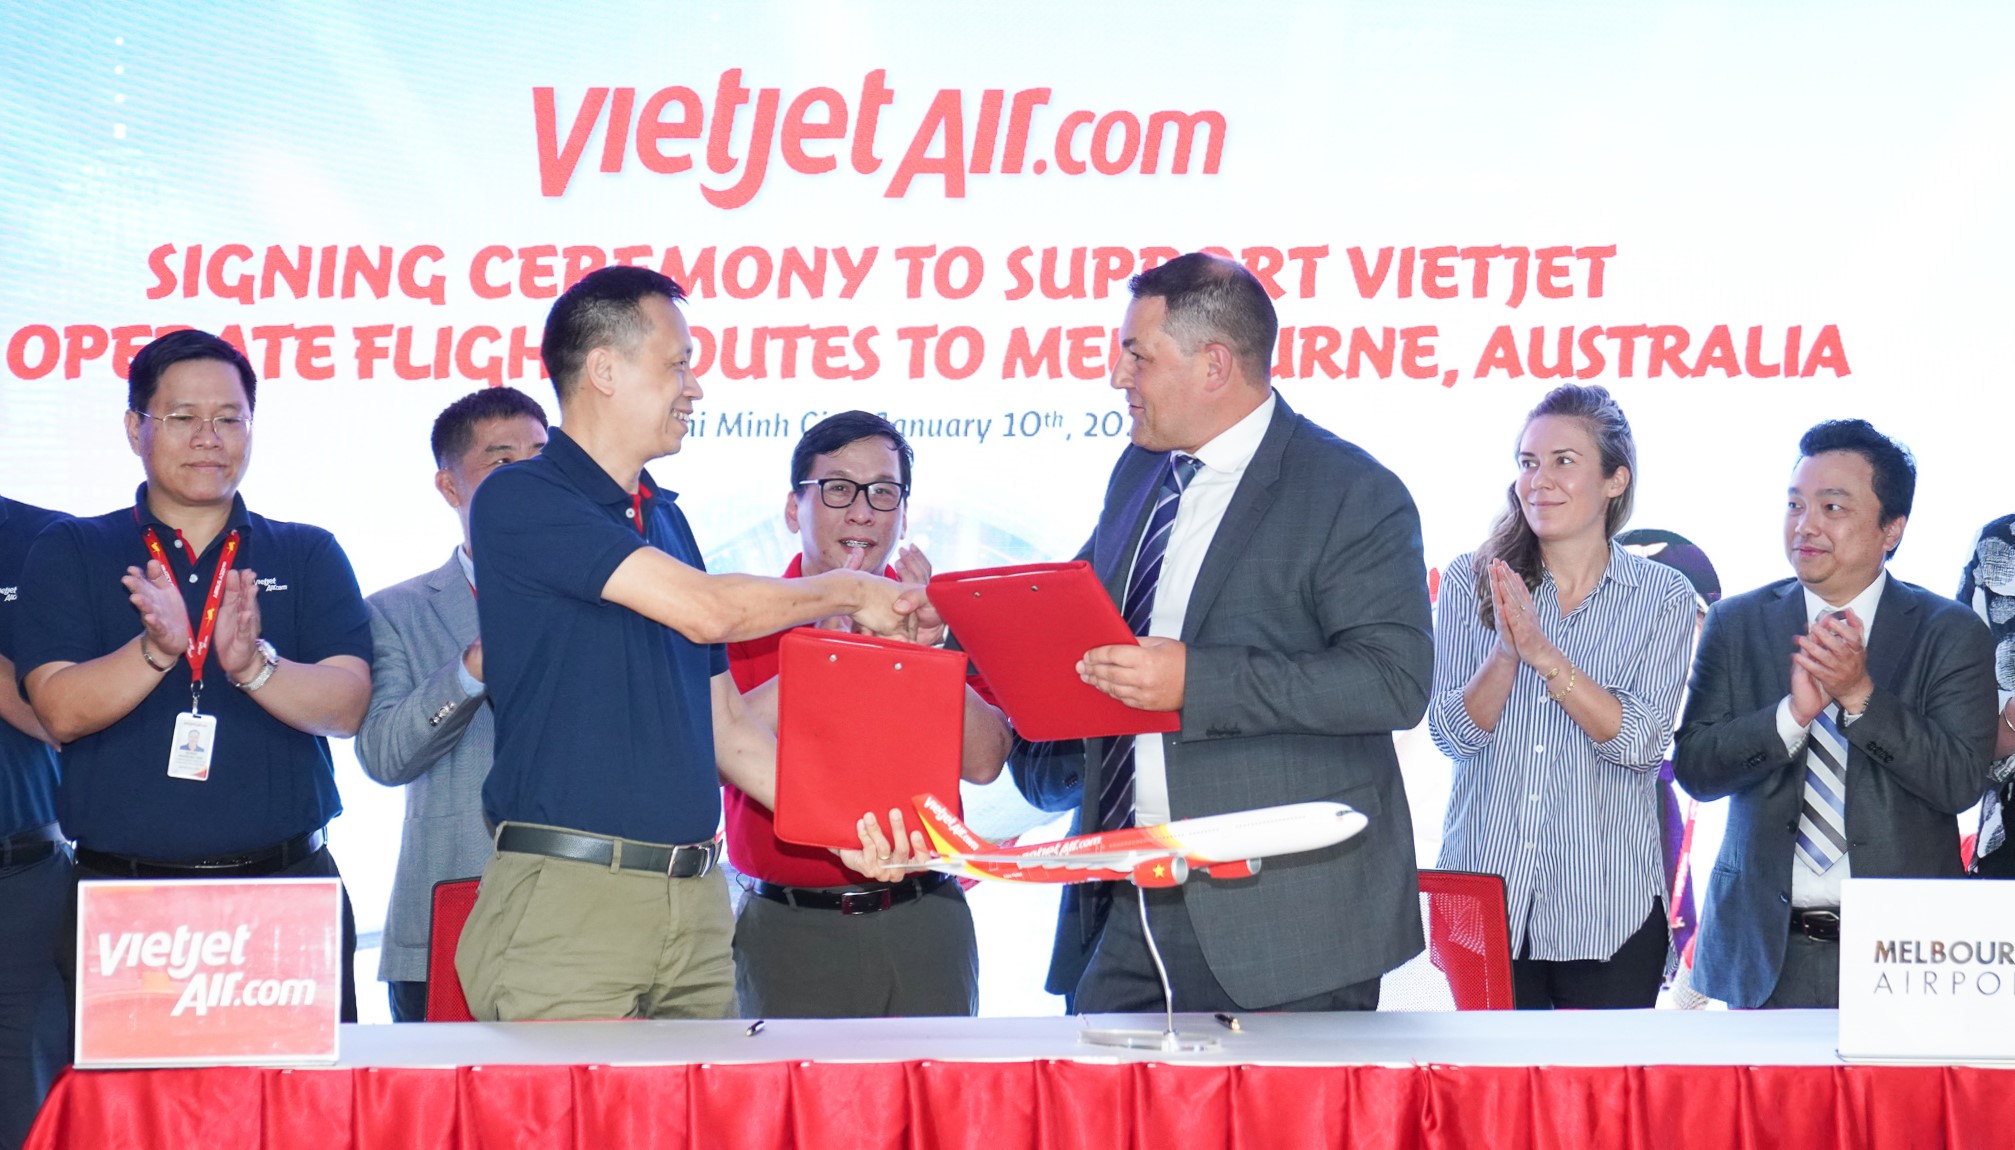 VietJet to start direct flights to Melbourne from March 31